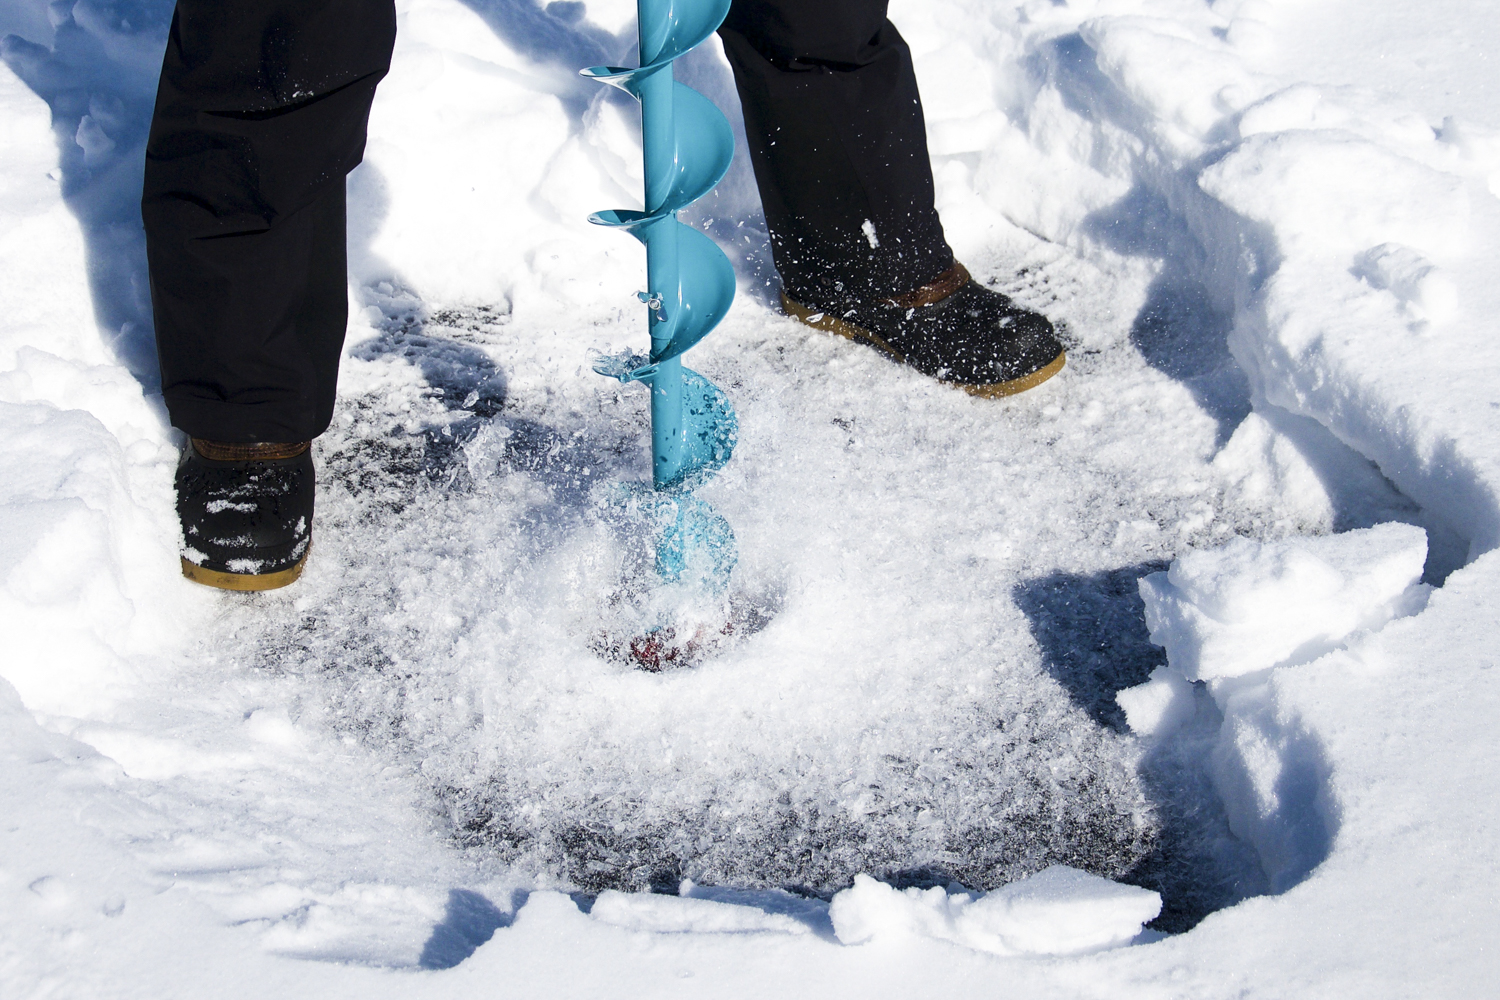 How to Ice Fish: Everything You Need to Know Before You Go - The Manual